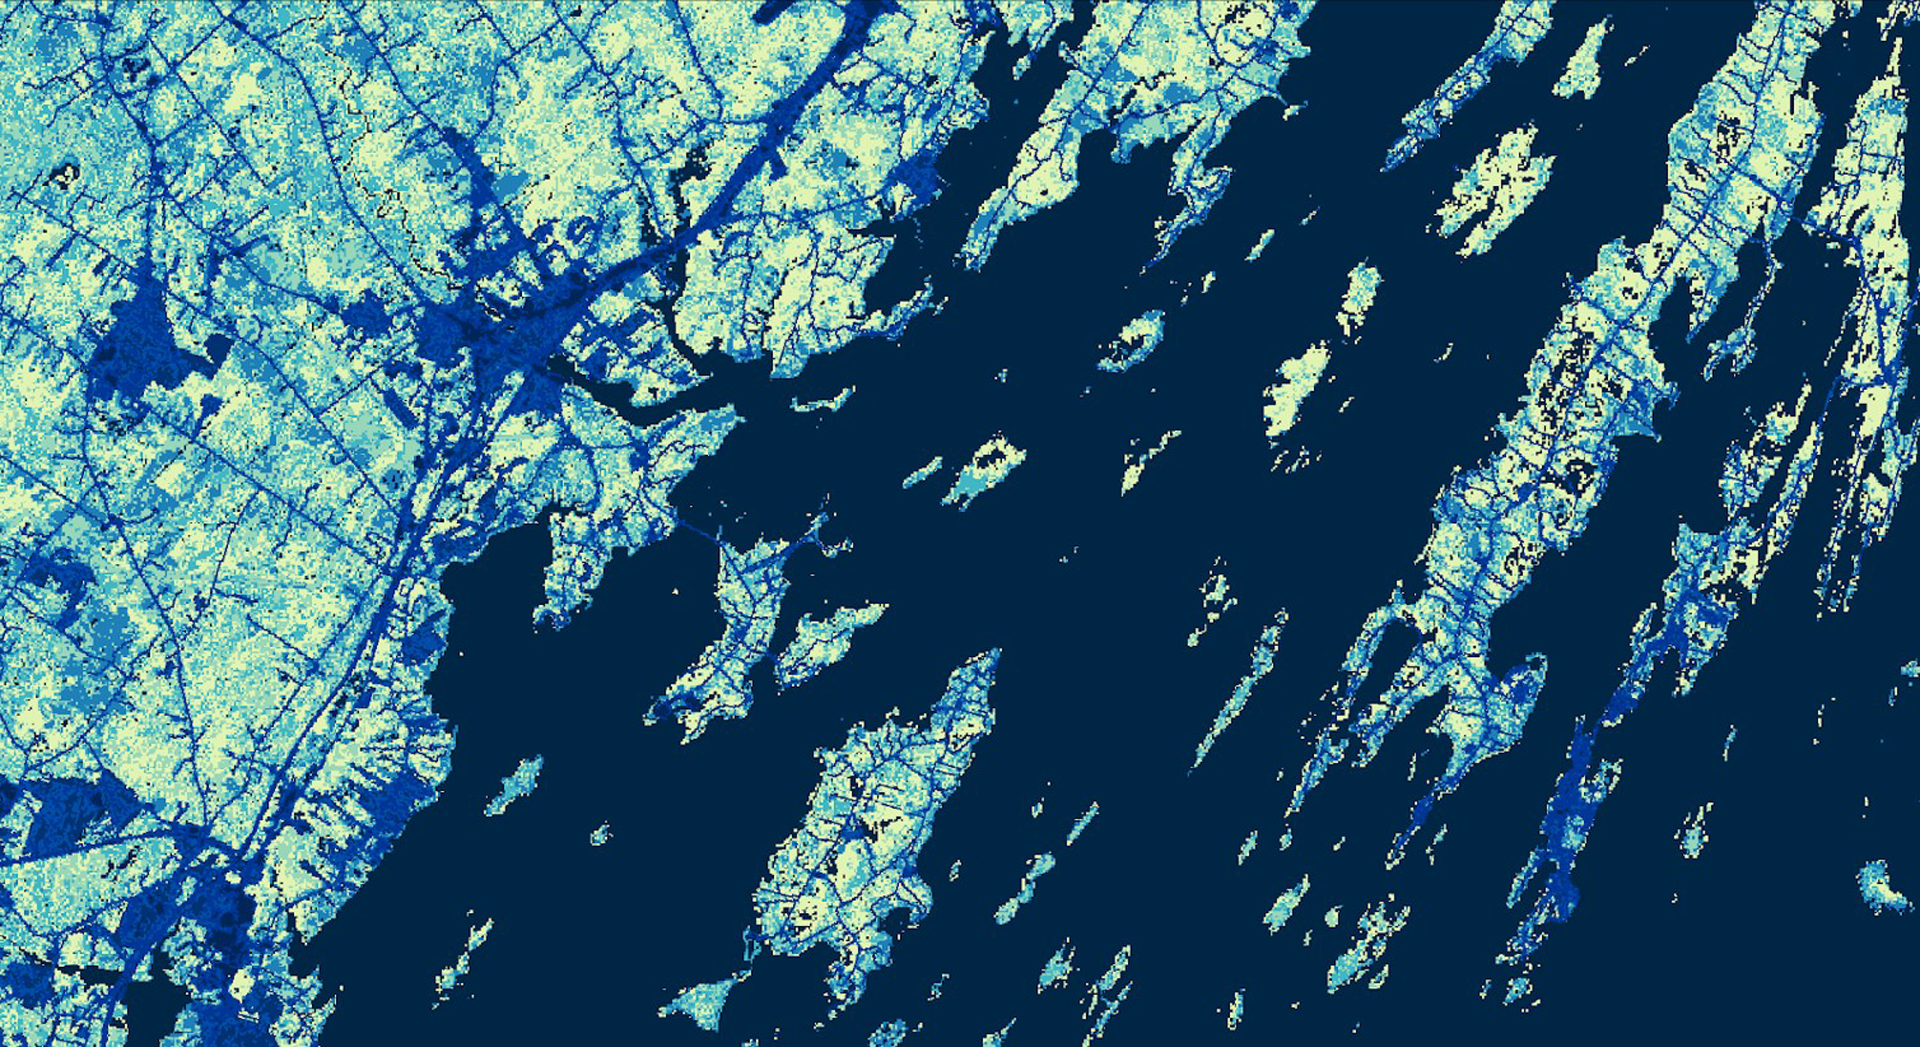 Above is a supervised land cover classification image using a mosaic of July 12, 19, and 28, 2018 Landsat 8 OLI data of Cumberland County, Maine. The shores of Yarmouth, Harpswell, and Chebeague Island are displayed. Scaled urbanization is shown with lighter blues indicating the most vegetated areas and darker blues indicating the most impervious urban areas. Navy blue represents water. Identifying the land cover type allows for better understanding of tick encounter risk.